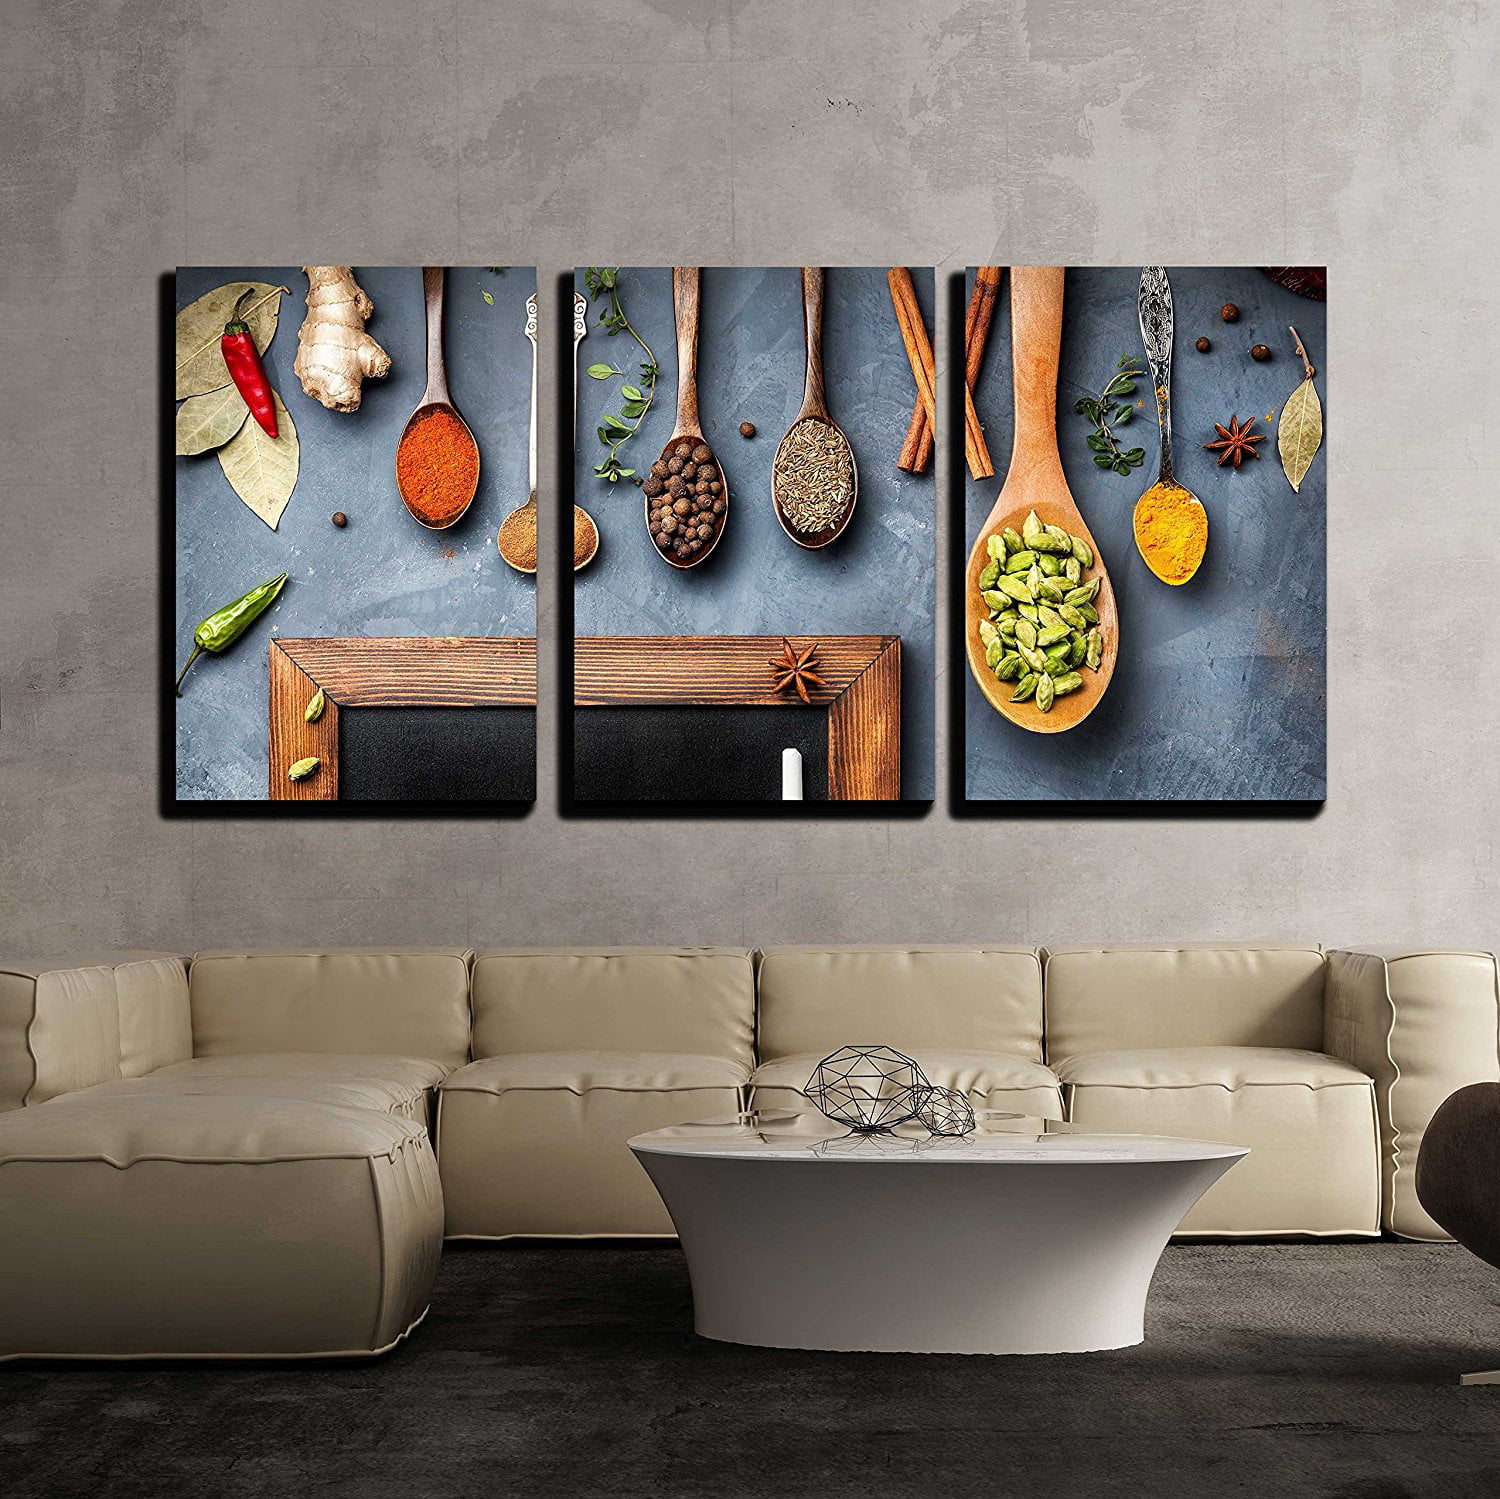 Wall26 Spices on Kitchen Table - Canvas Art Wall Decor - 24